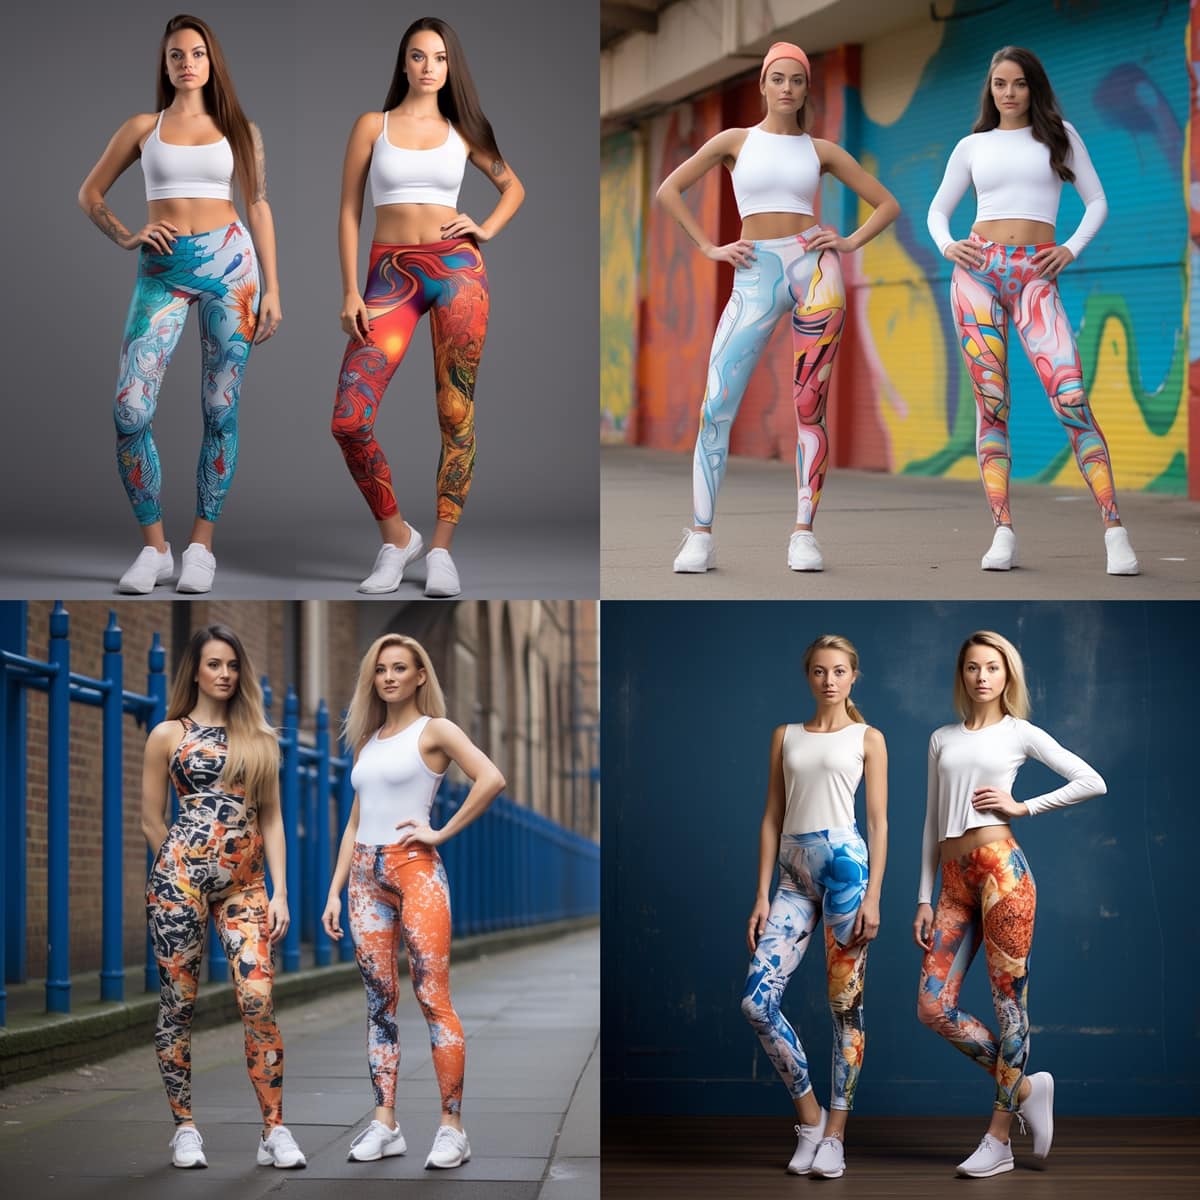 Style Meets Function: A showcase of vibrant fashion leggings and sleek activewear leggings, all complemented by trendy trainers for the ultimate athleisure ensemble